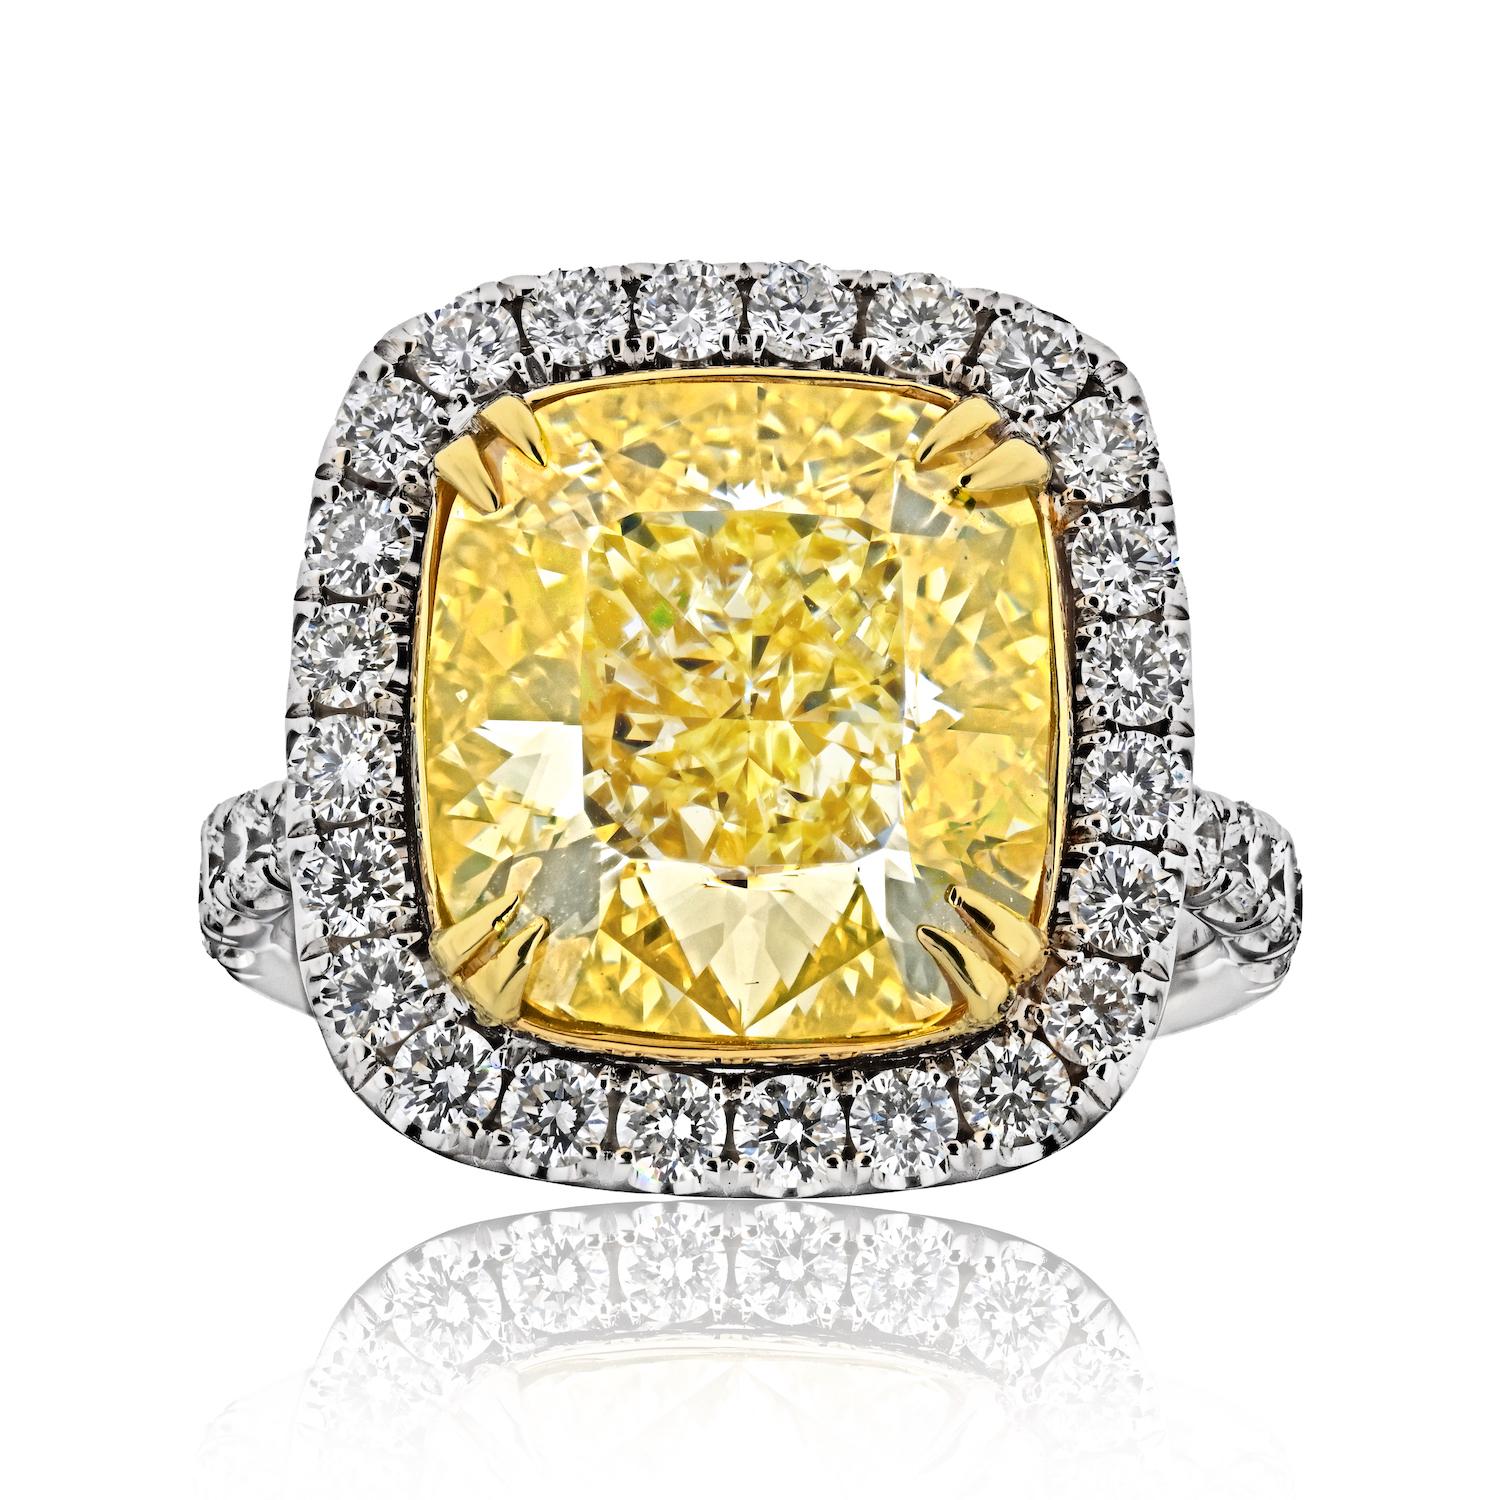 Elevate your style with this exquisite Fancy Yellow Intense Cushion Cut Diamond Ring. At its heart lies a stunning 10.03-carat cushion-cut diamond, certified by GIA as Fancy Intense Yellow in color and boasting a VS2 clarity. This magnificent gem is